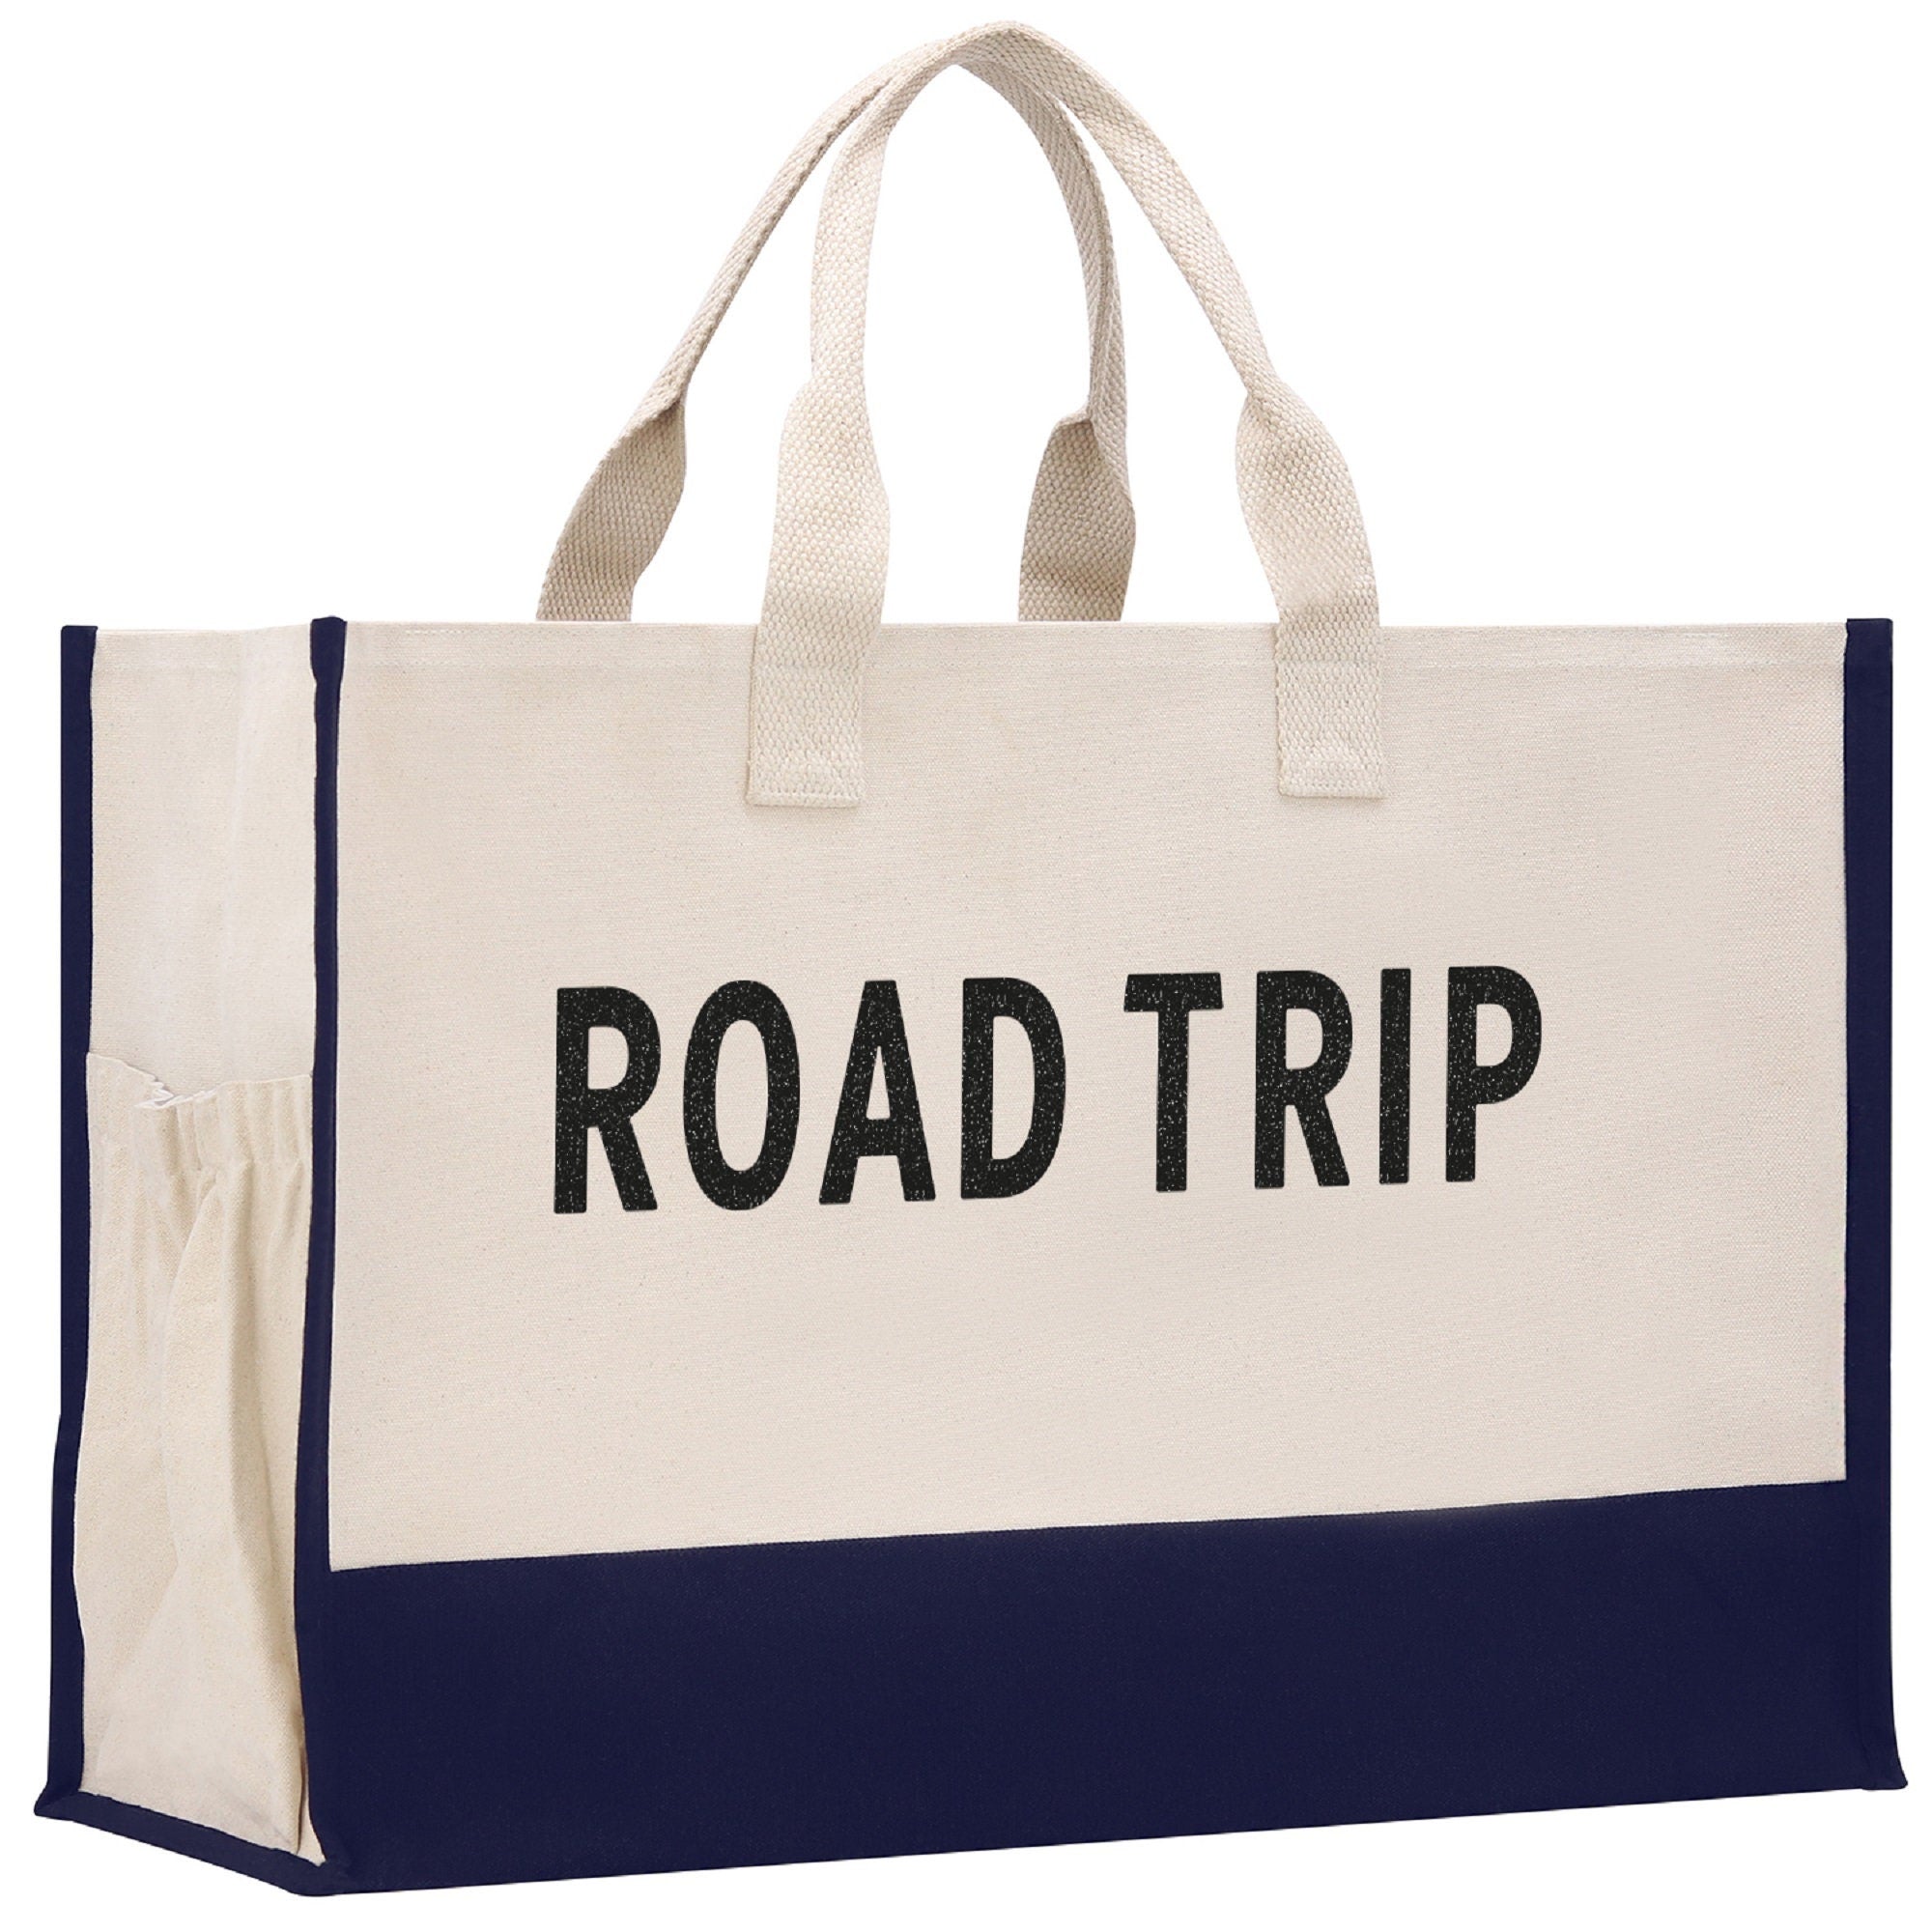 Road Trip Beach Tote Bag XL - Oversized Chic Tote Bag with Zipper and Inner Pockets - Gift for Her - Girls Weekend Tote - Weekender Bag